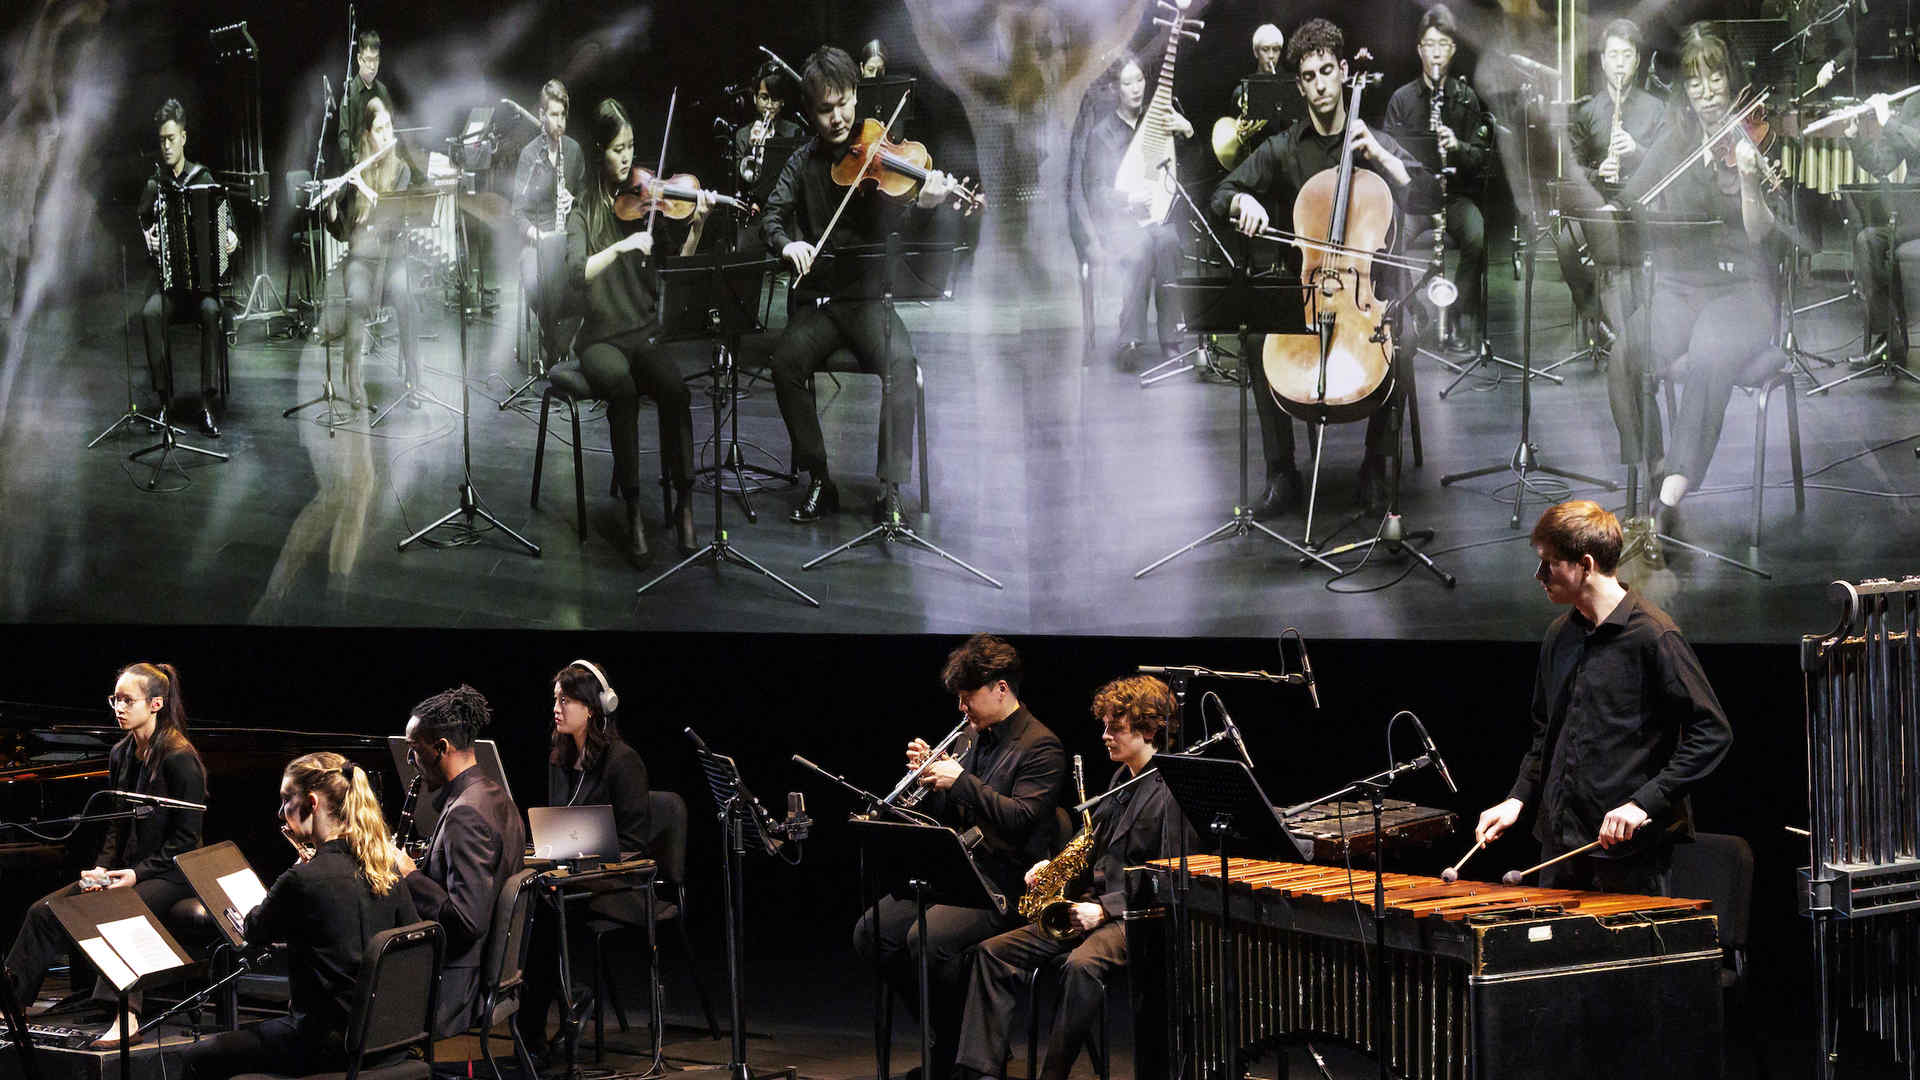 Photo from the interdisciplinary performance of 'In C' showing orchestral musicians and behind them on a screen are projections of musicians from the Tianjin Juilliard School as well as dancers